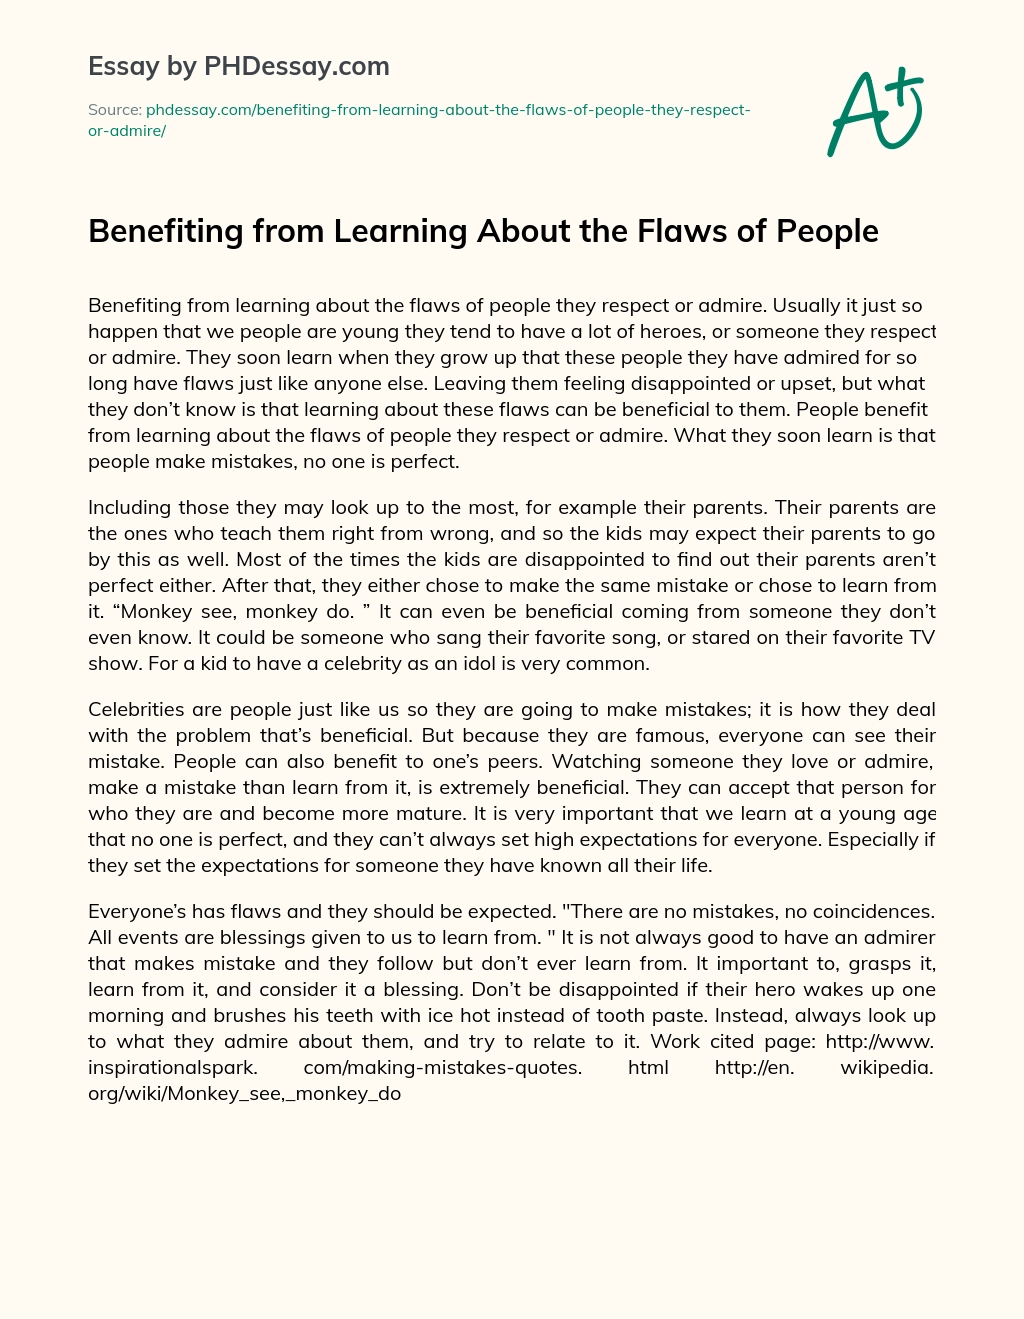 Benefiting from Learning About the Flaws of People essay